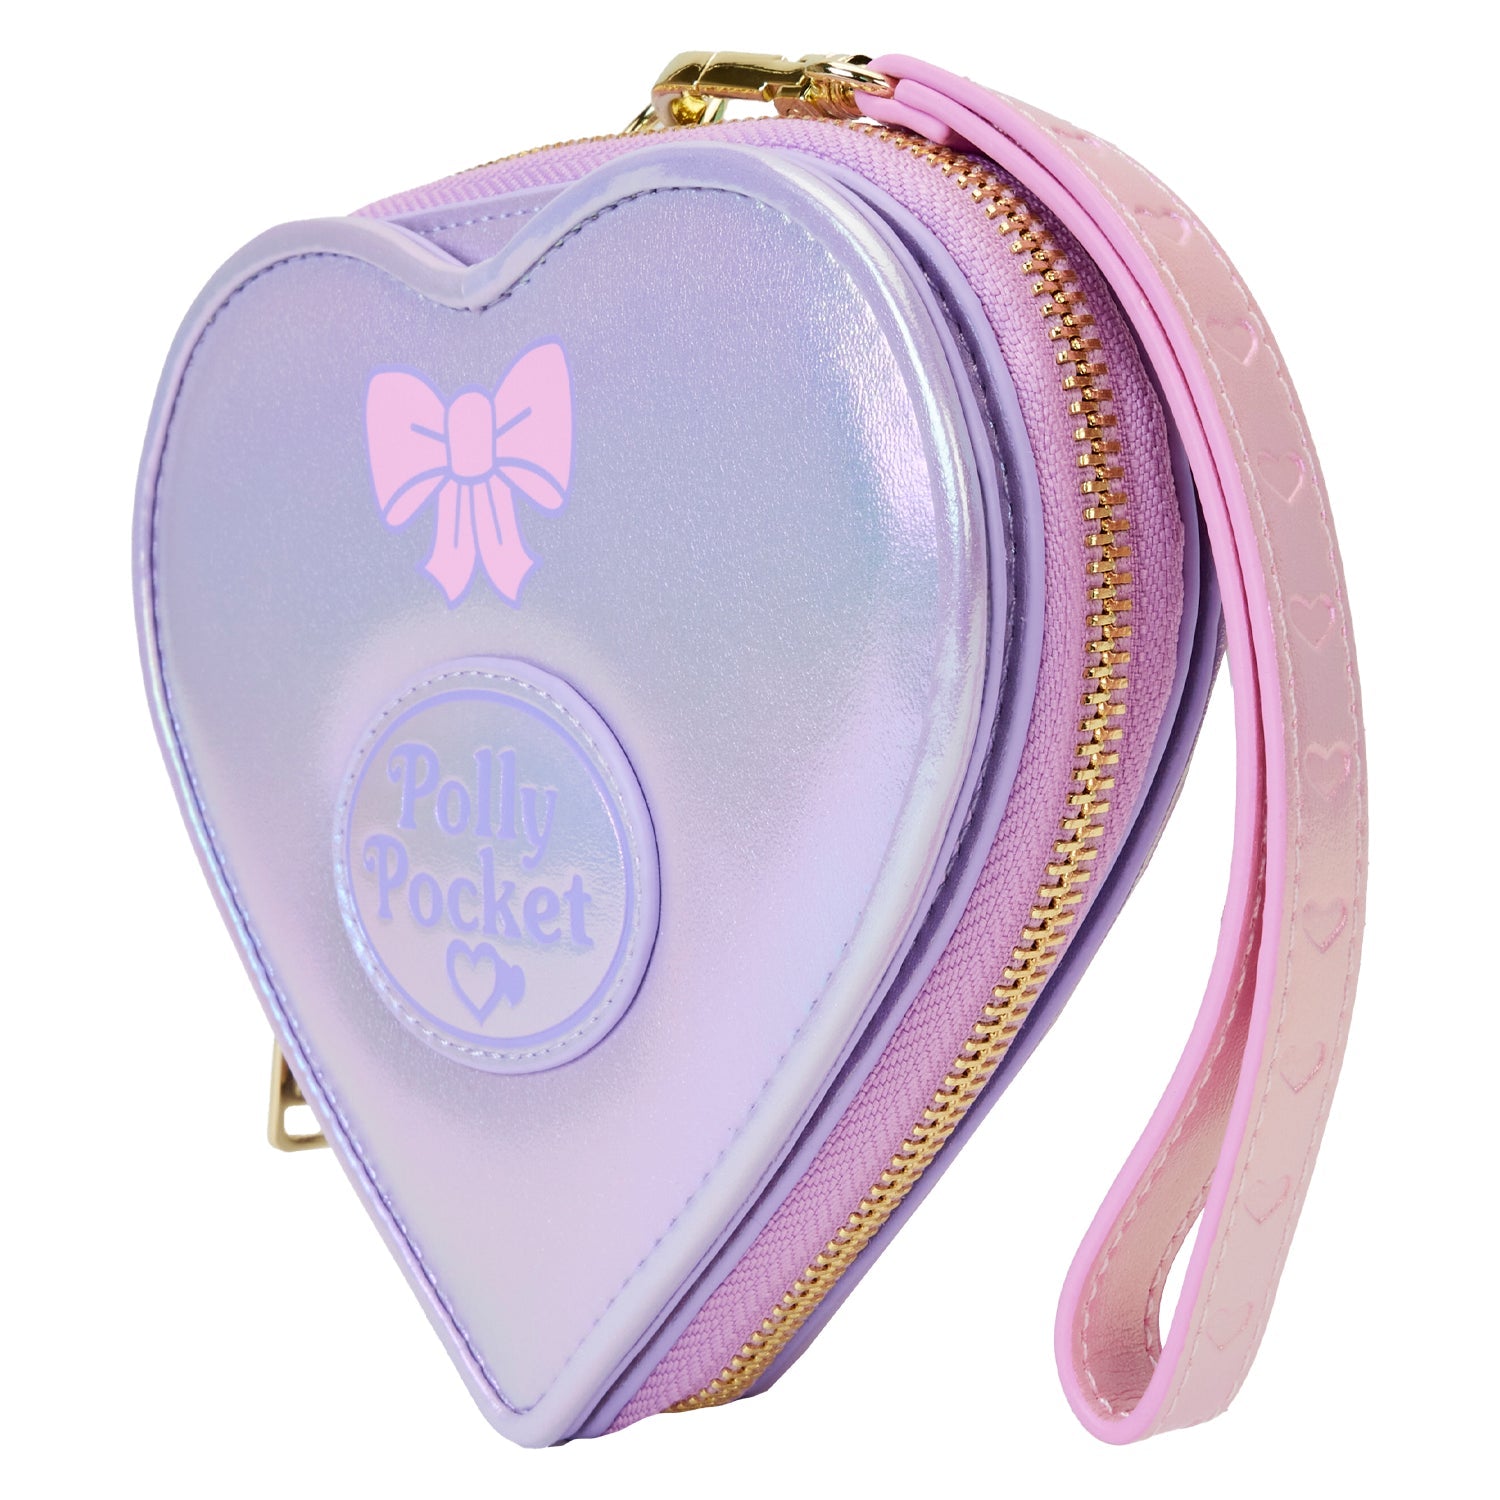 Loungefly x Polly Pocket Zip Around Wallet - GeekCore